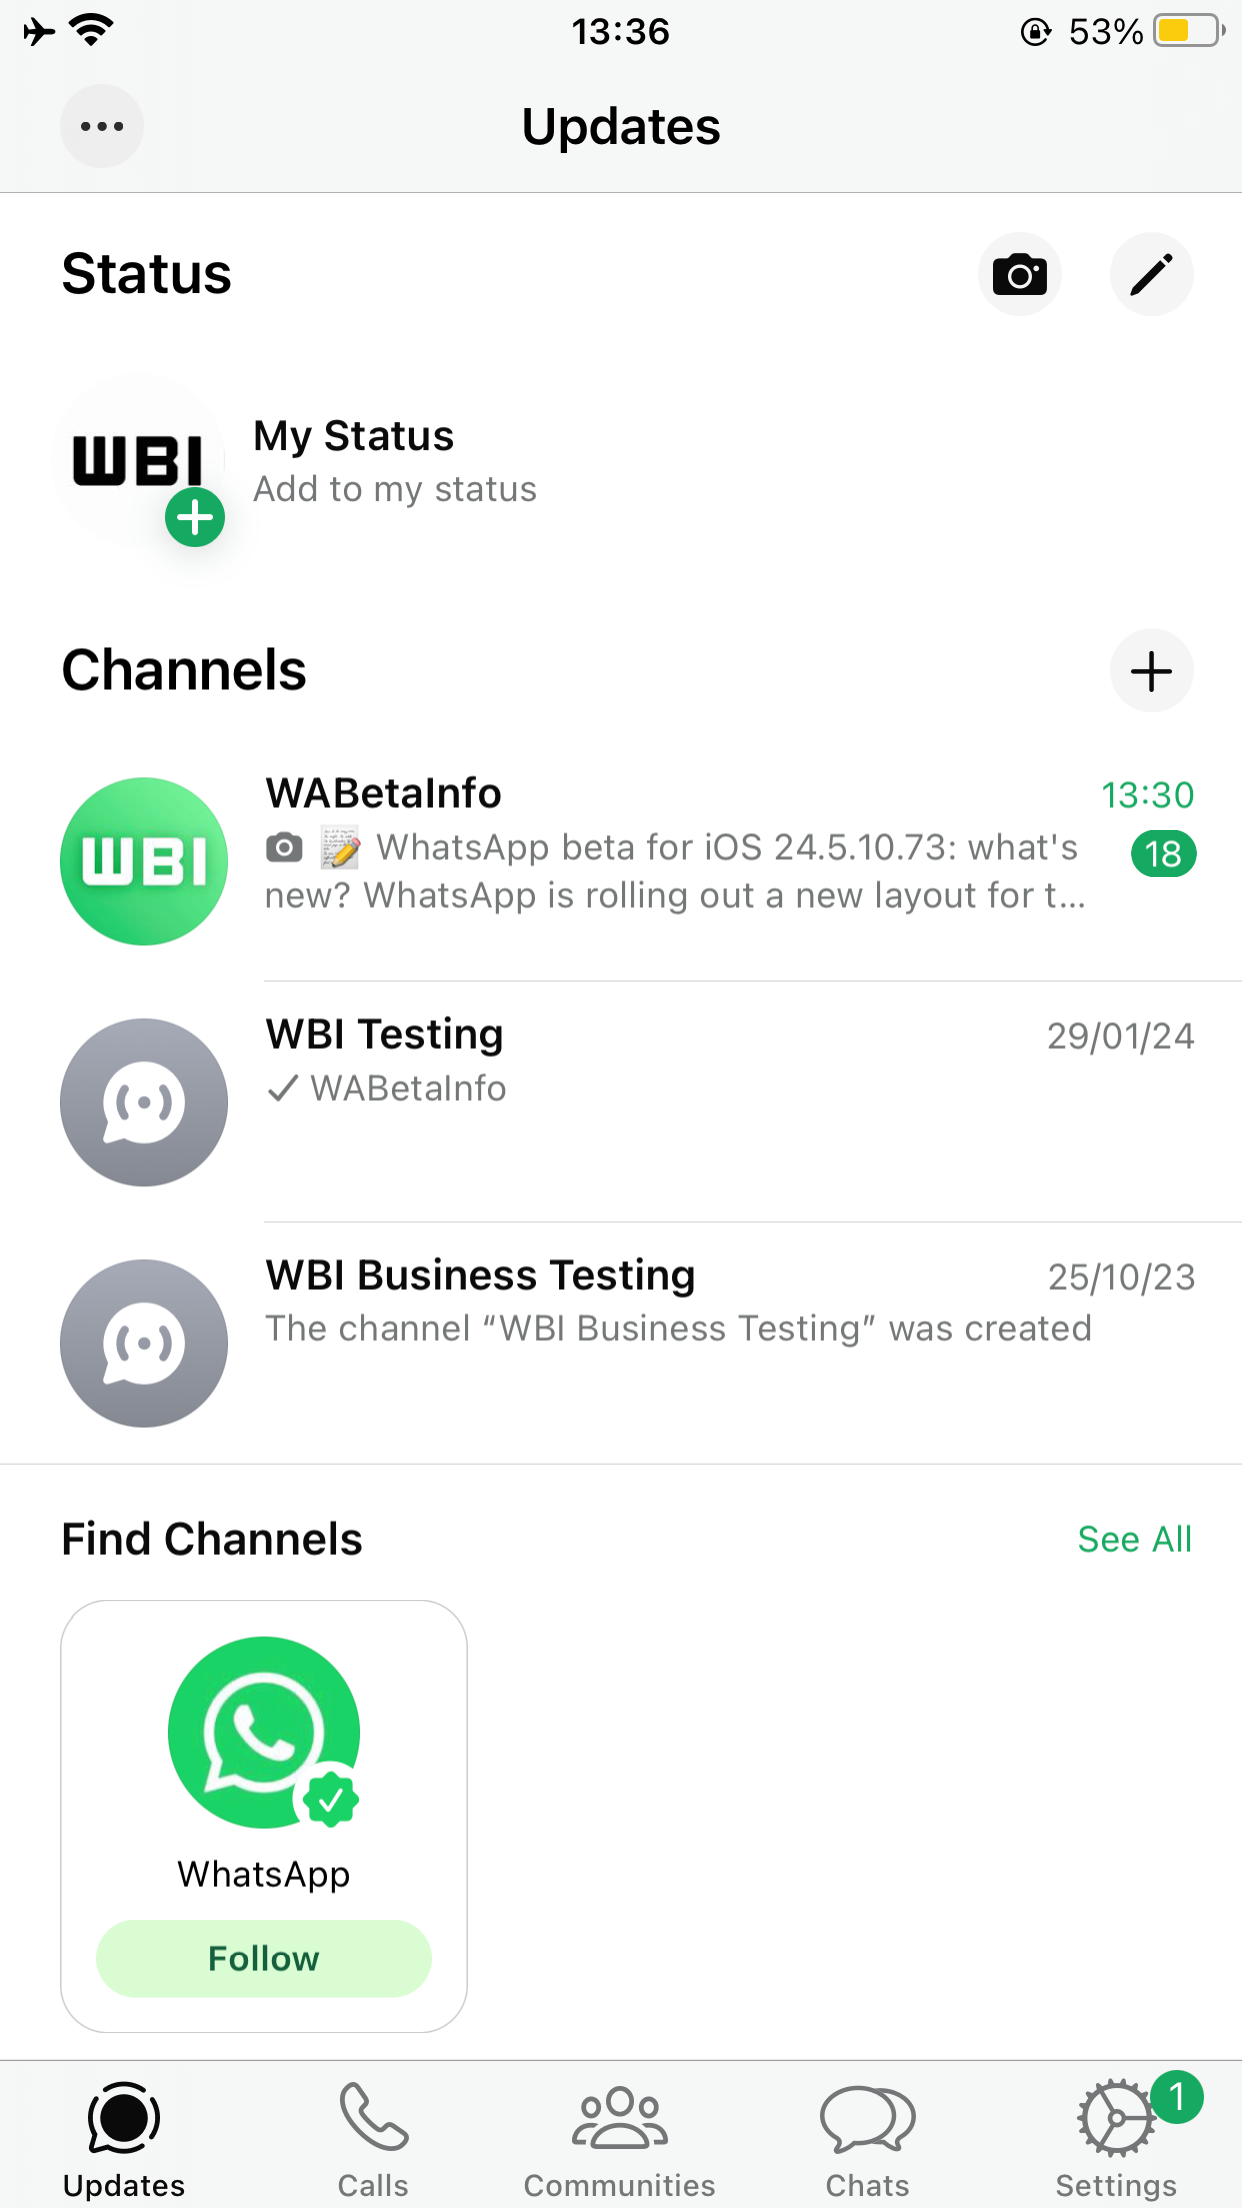 WhatsApp discovered channels